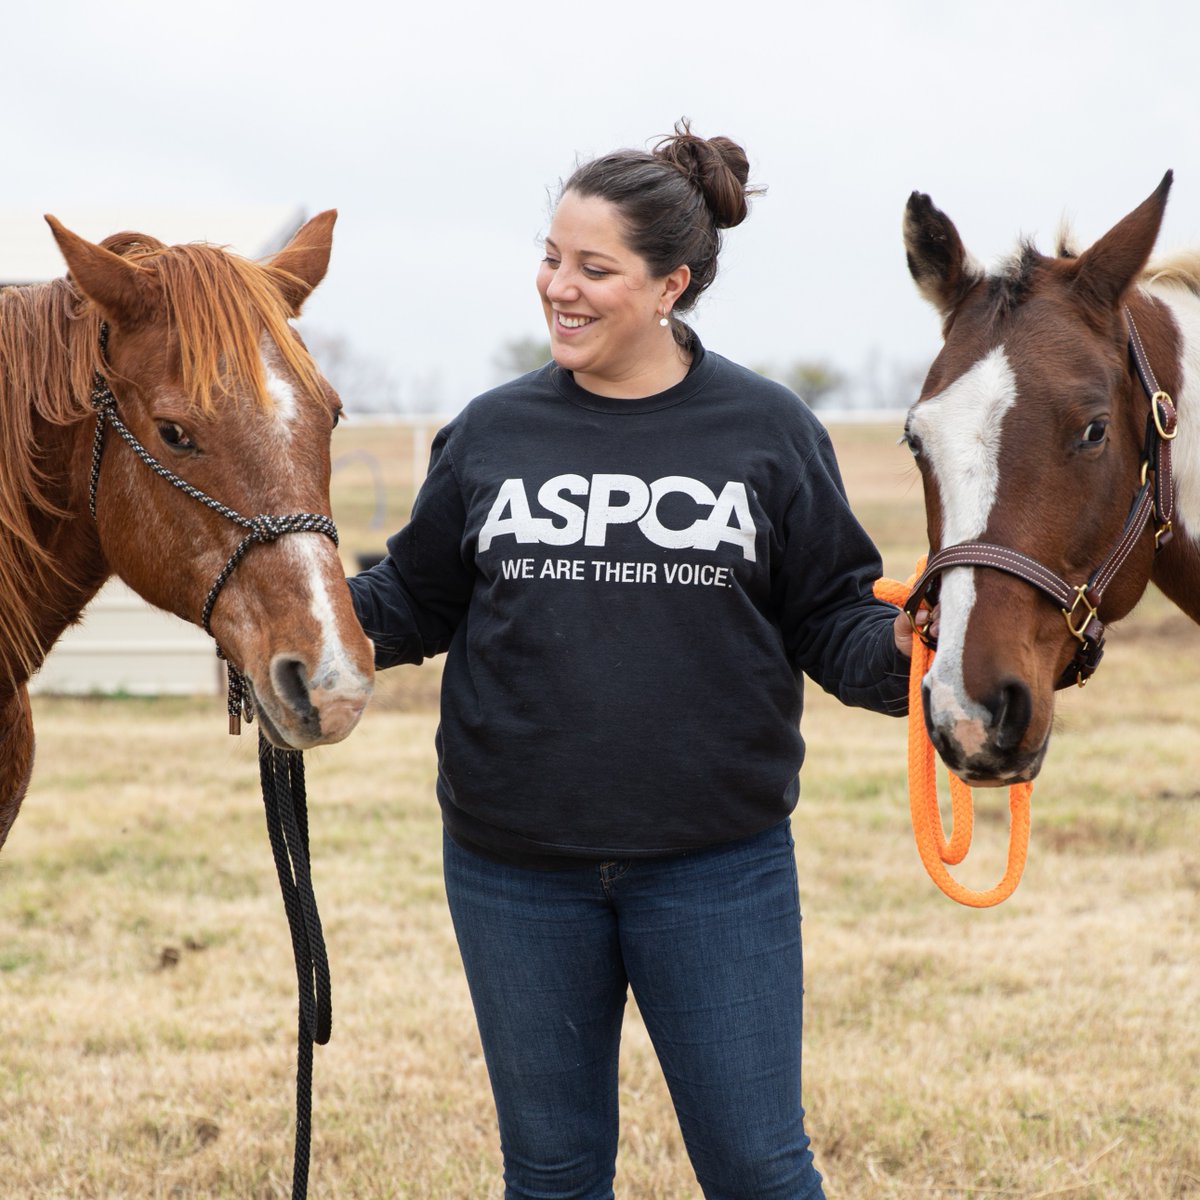 It is officially #AdoptAHorse Month! Let's join forces to spotlight adoptable equines and help them find loving homes. Check out this helpful guide for new equine adopters created by @HI_mag. #EquineWelfare #ASPCA #HorseRescue